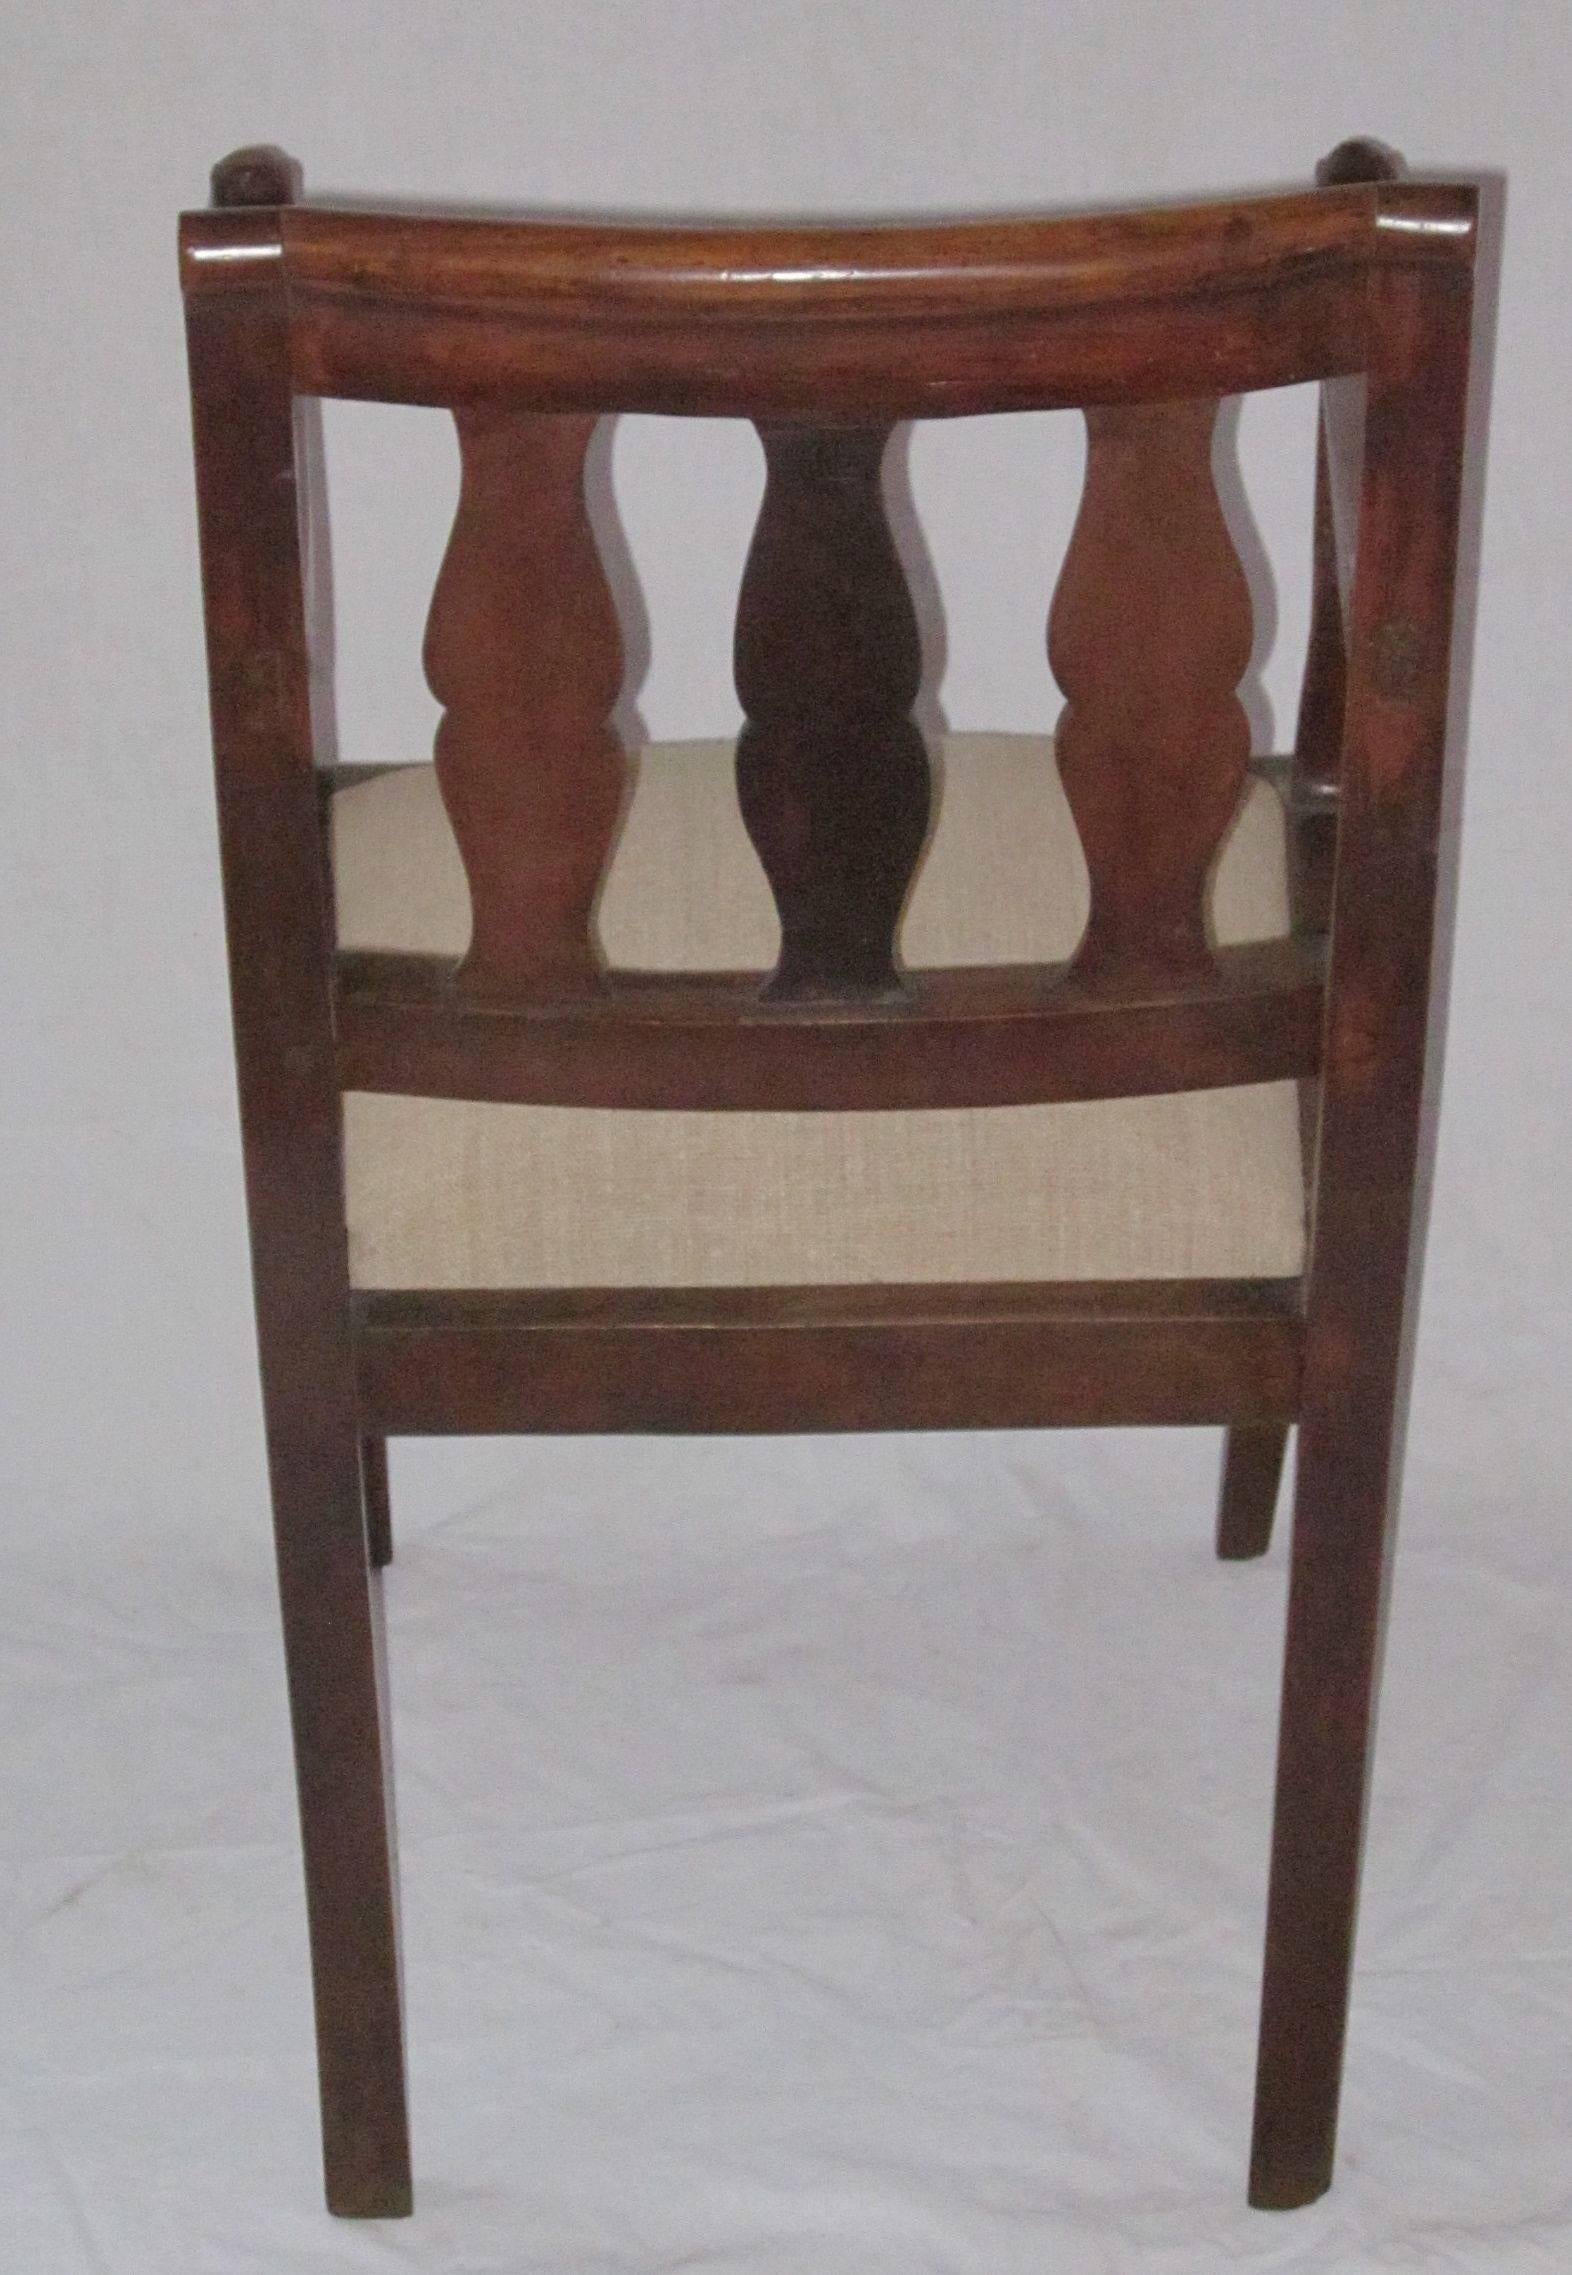 English walnut armchair or desk chair with decorative animal face detail on the arms, circa 1780.
The seat has been reupholstered in vintage Belgian linen.
Beautiful wood patina.
 